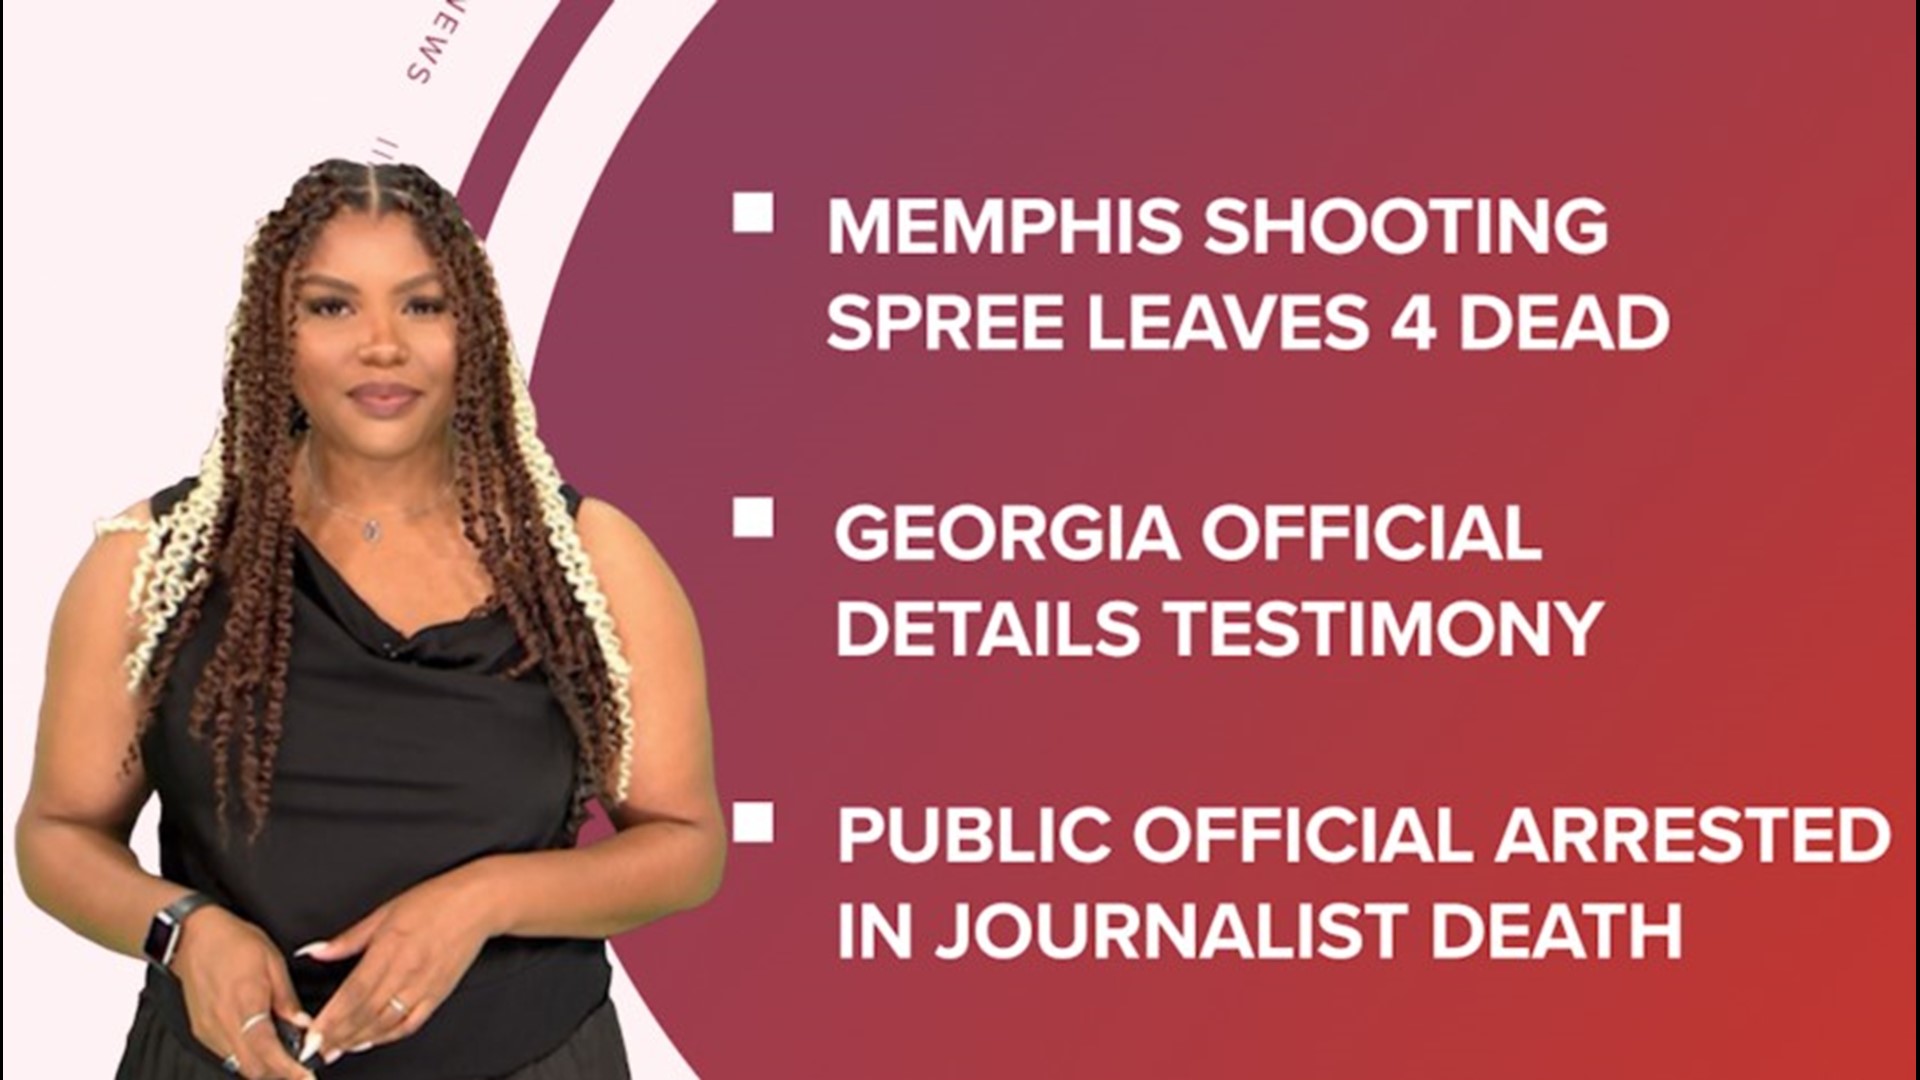 A look at what is happening in the news from a Memphis shooting spree leaving 4 dead to the Obama's portraits unveiled at the White House and the latest Apple event.